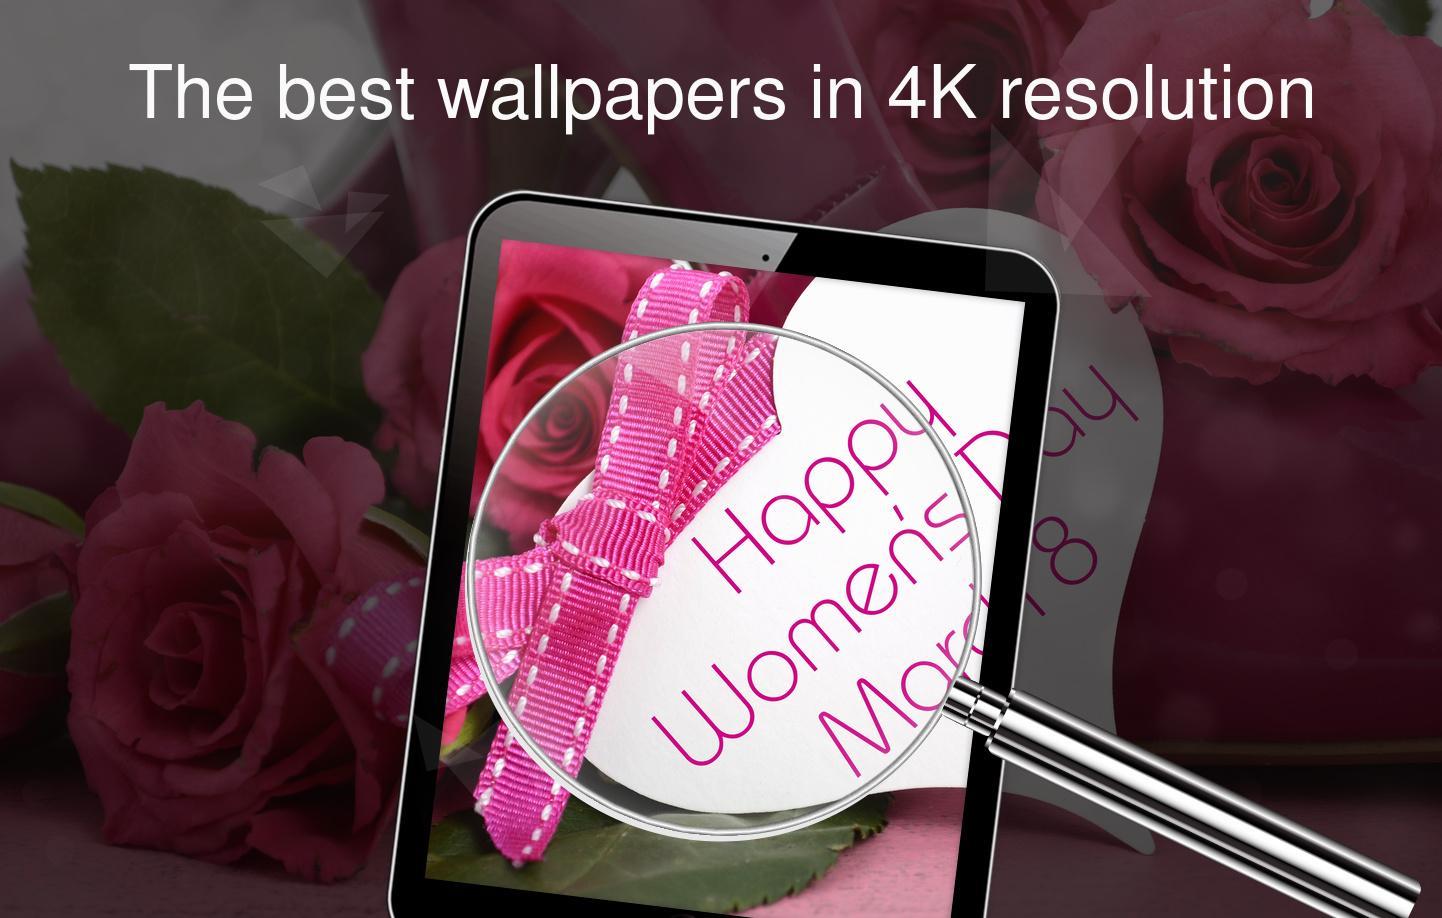 Wallpaper for women's day for Android